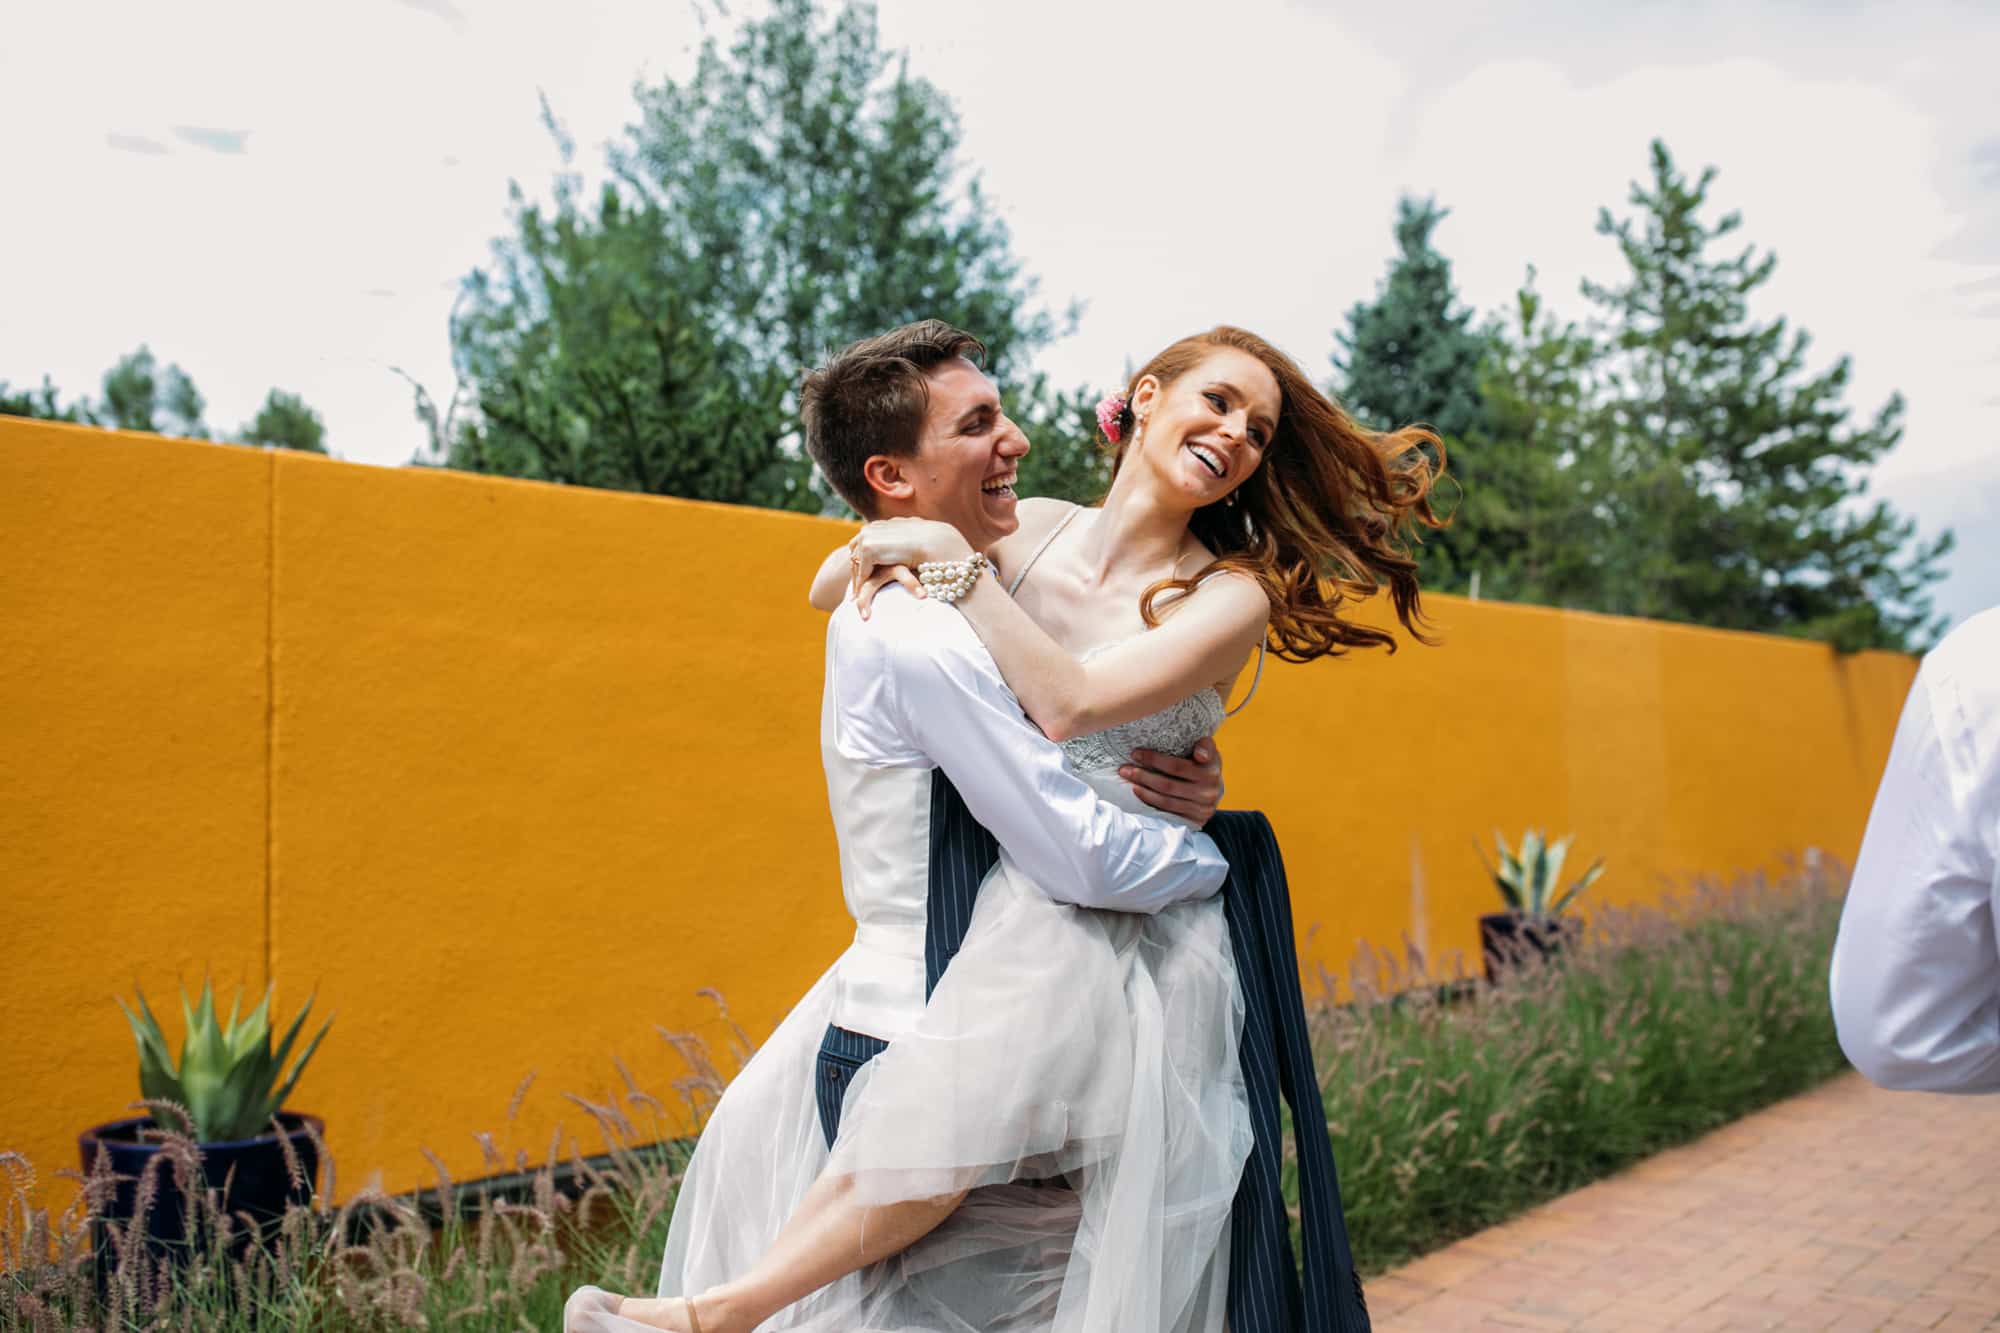 fun bride and groom, silly bride and groom, colorado botanic gardens, red haired bride